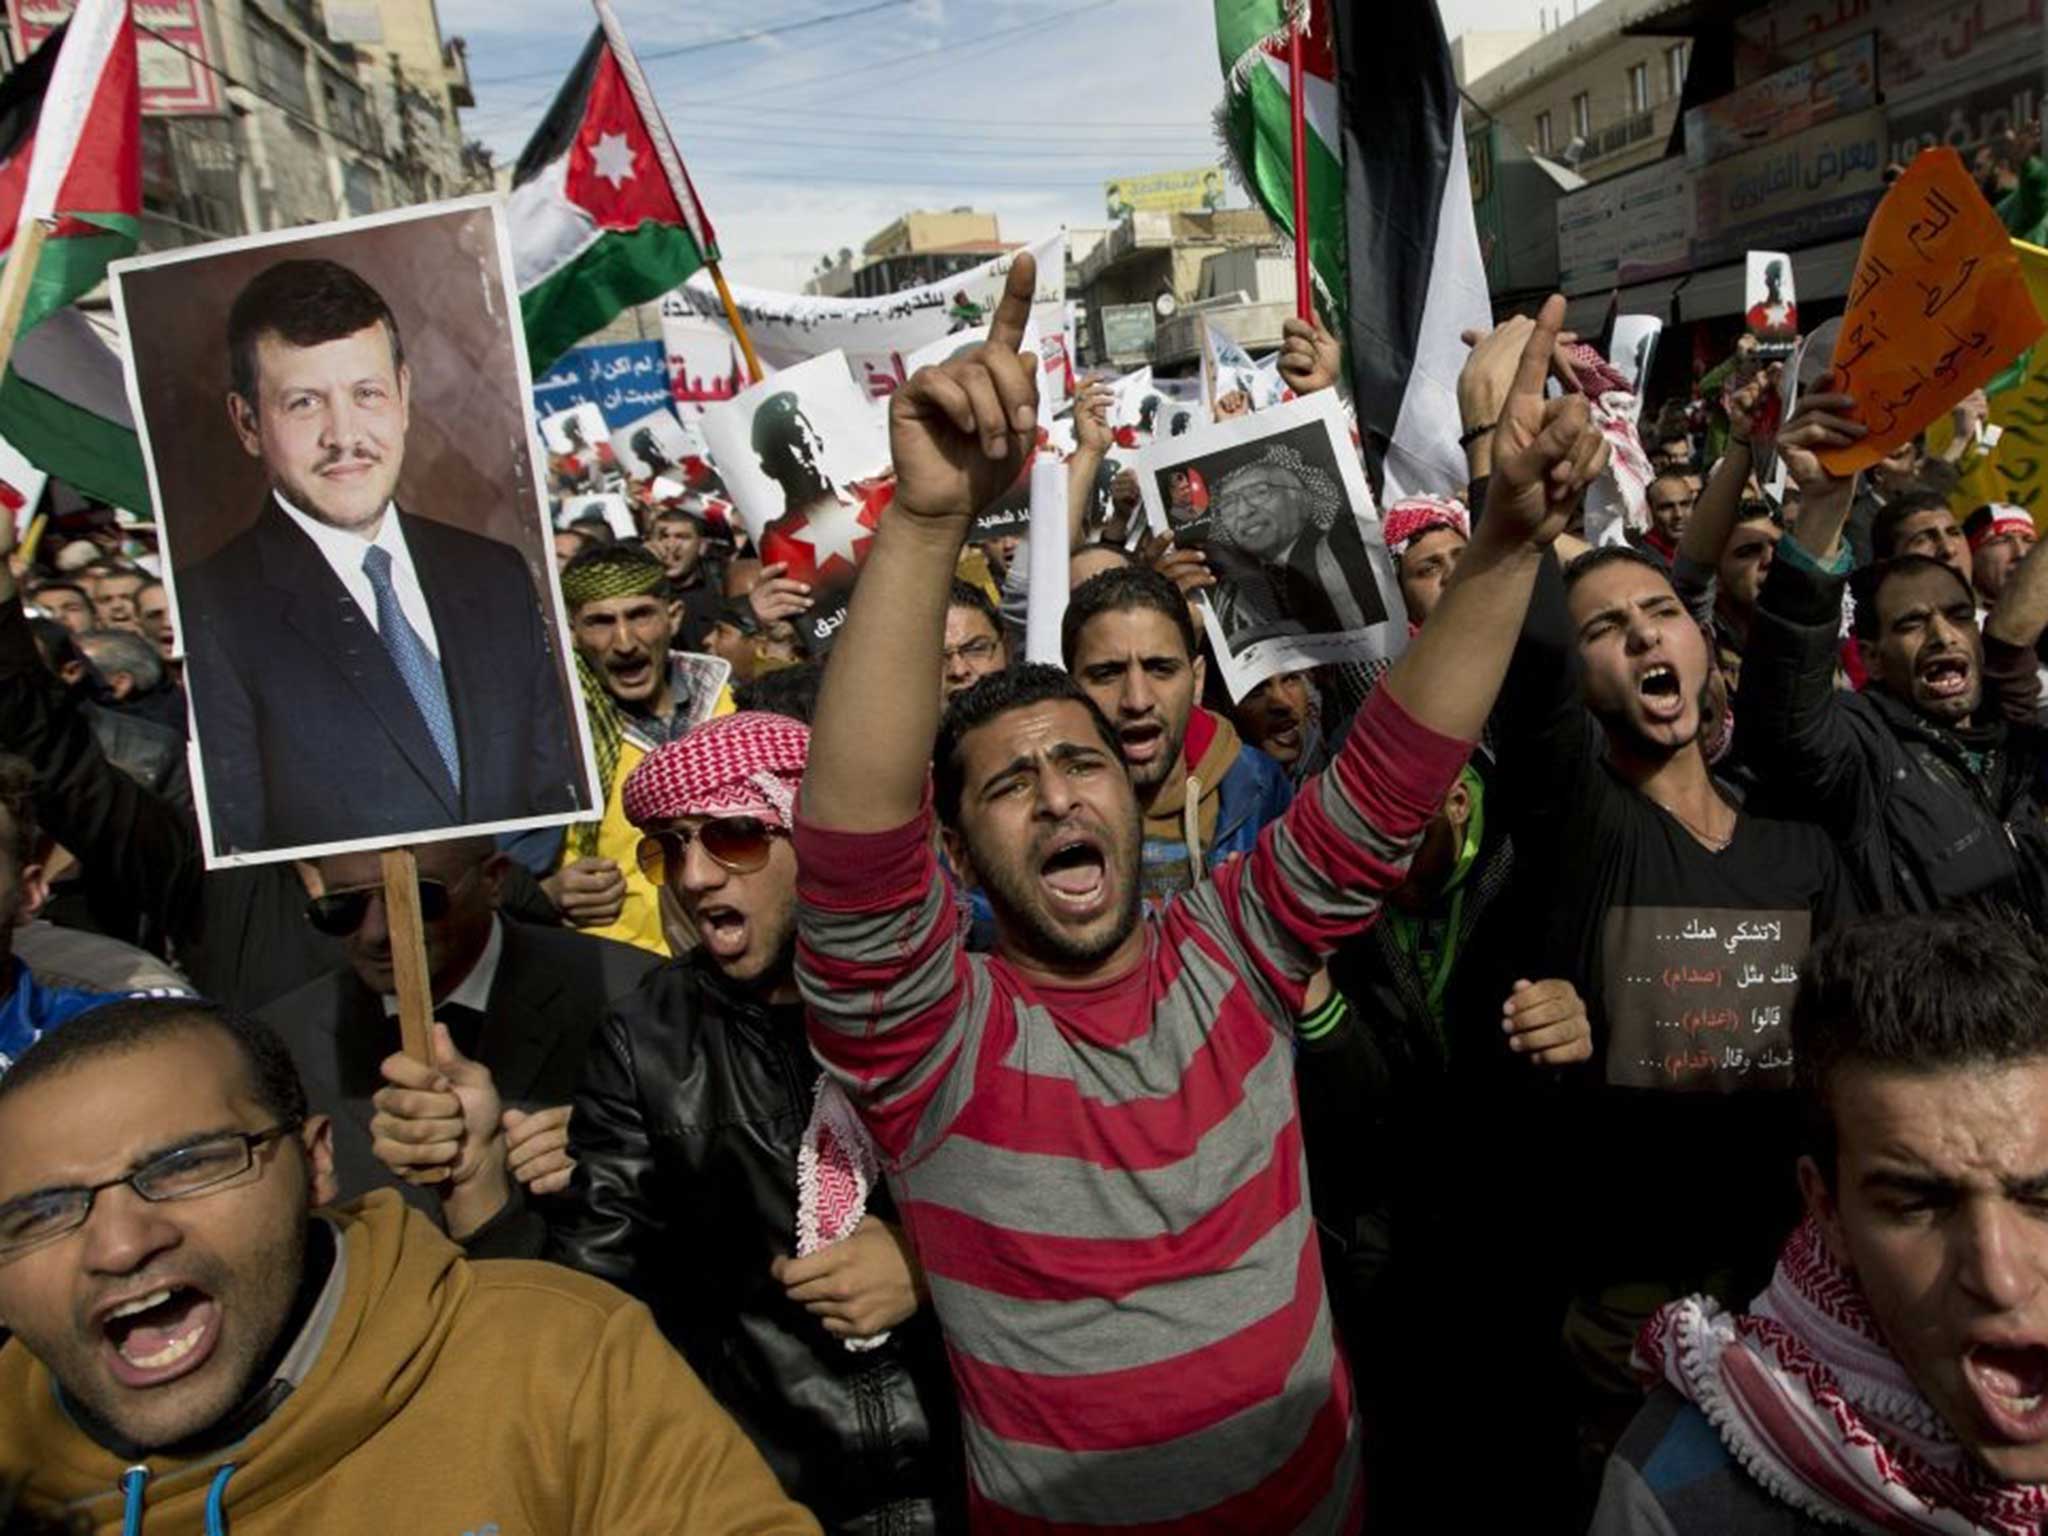 Protesters take to the streets in Jordan: The mood in the nation has turned ugly following the brutal execution of a pilot by Isis